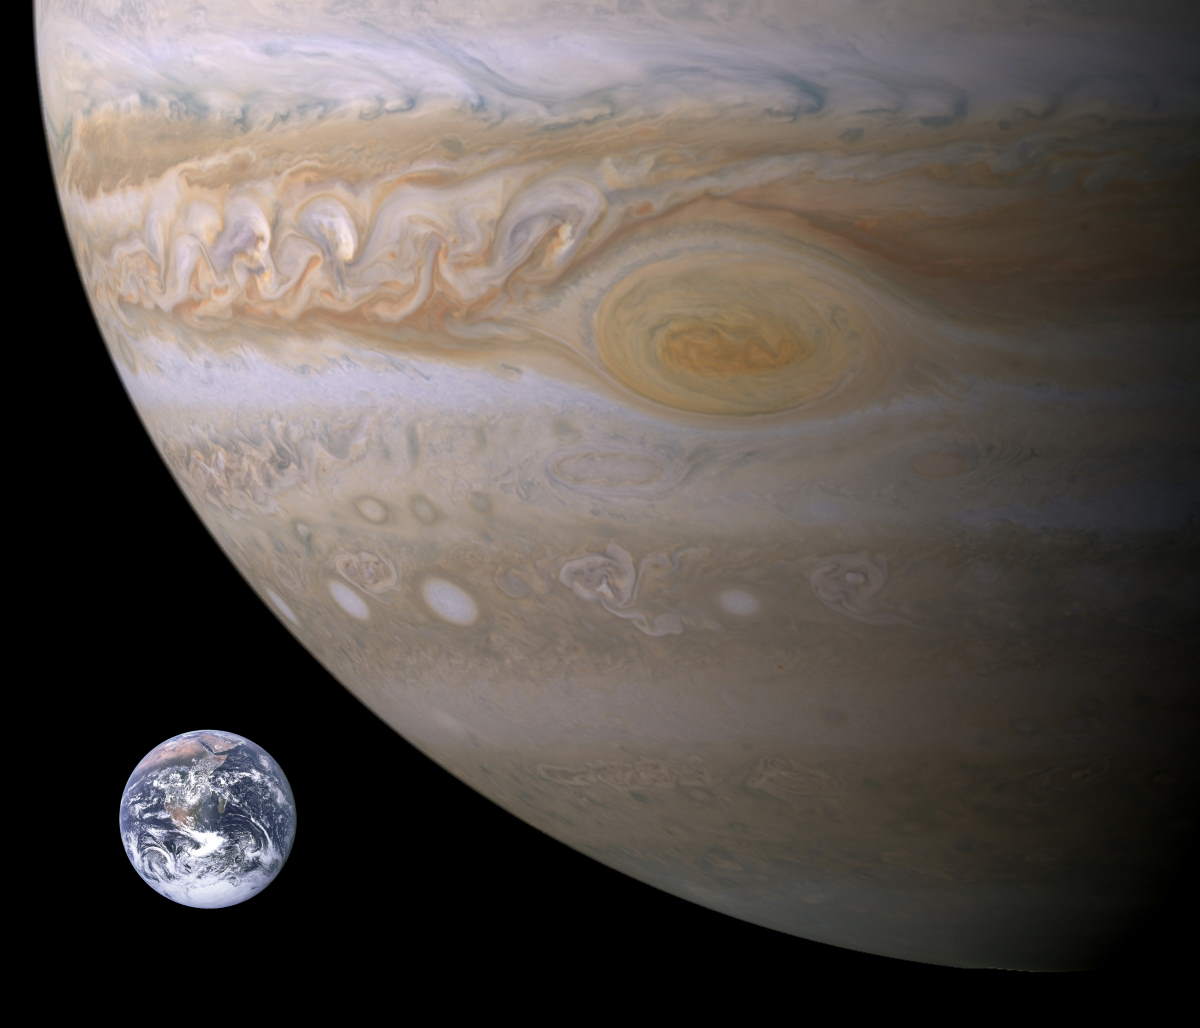 Jupiter's Great Red Spot is the largest hurricane in Solar System